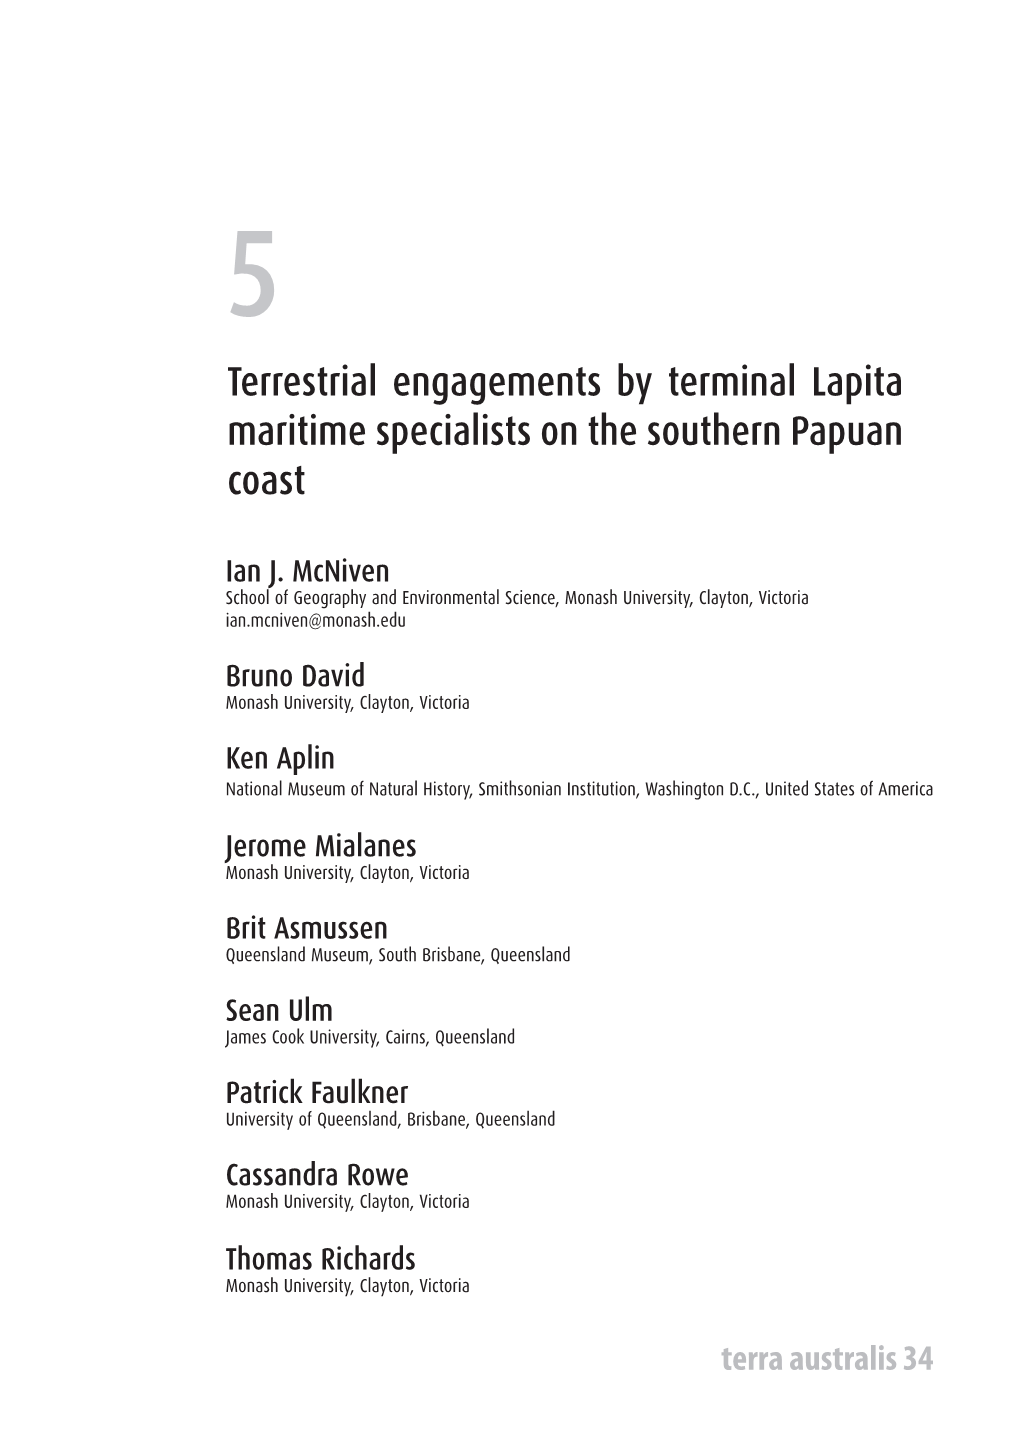 Terrestrial Engagements by Terminal Lapita Maritime Specialists on the Southern Papuan Coast